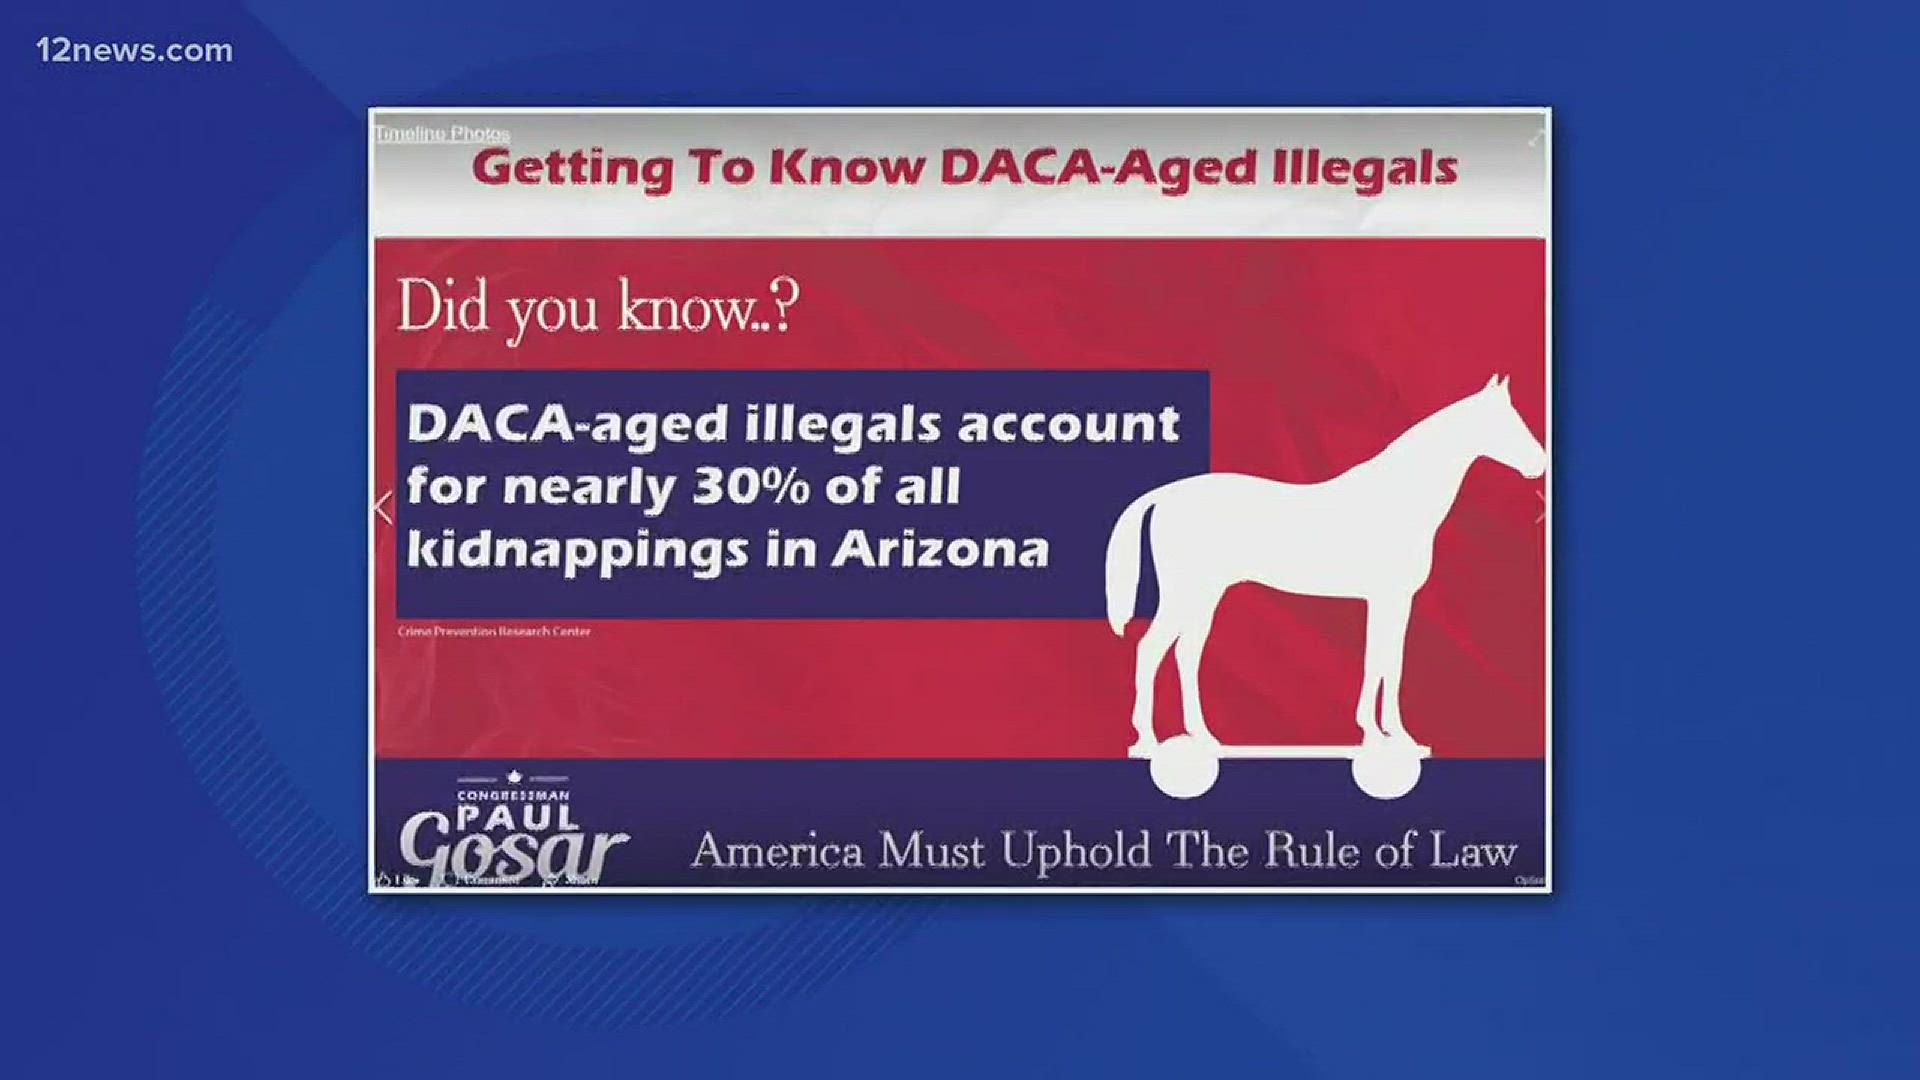 Congressman Paul Gosar posted claims suggesting DACA immigrants account for 30 percent of kidnappings in Arizona.